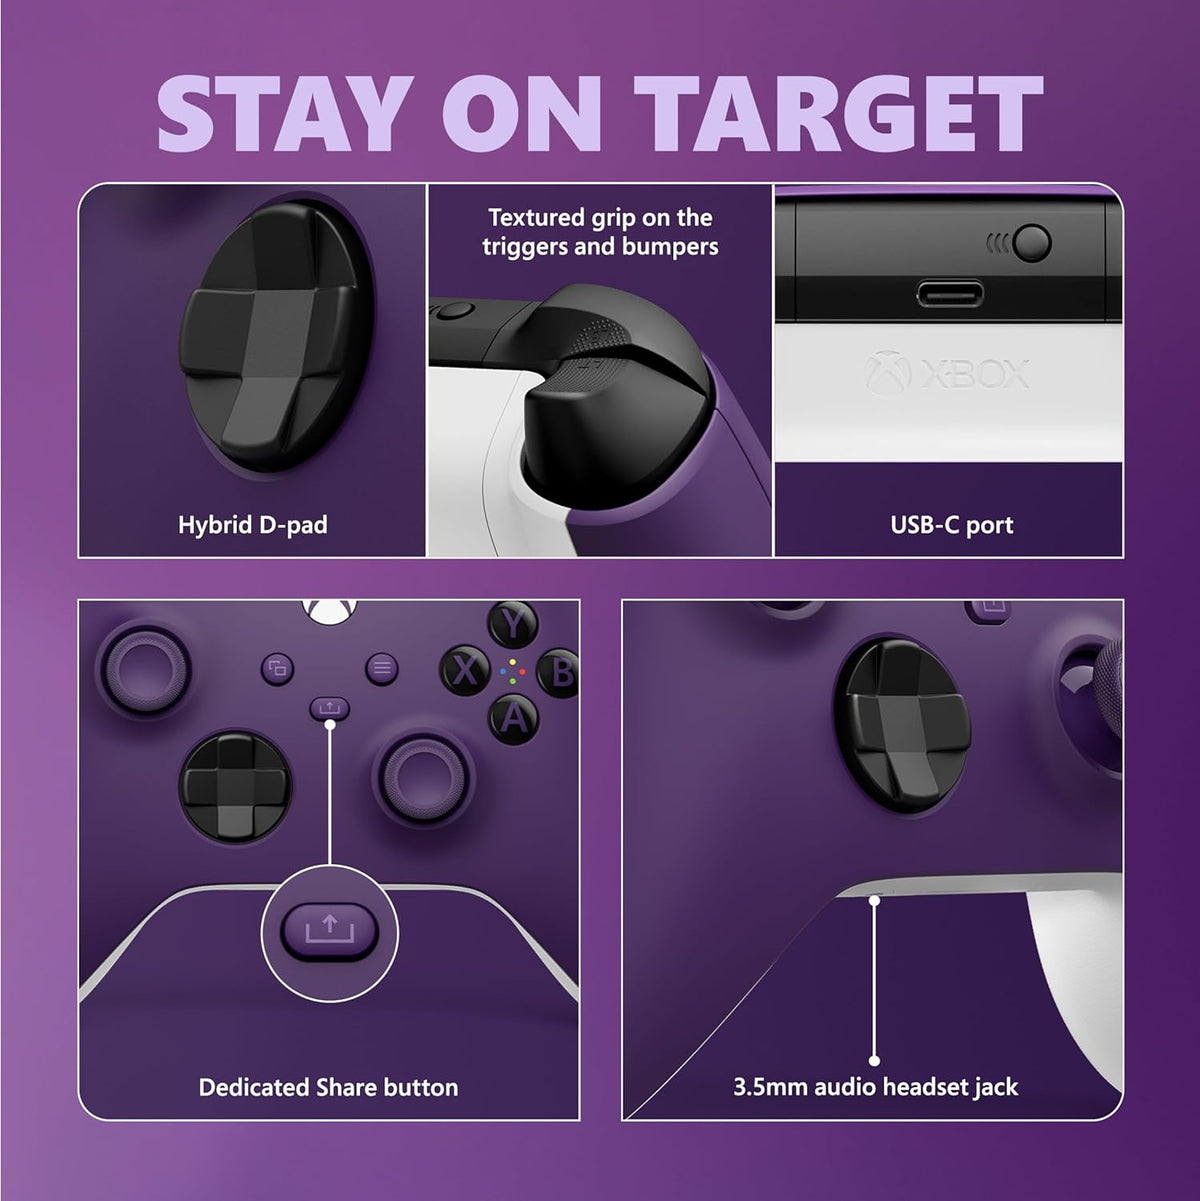 Xbox Series controller details, including Share button and hybrid